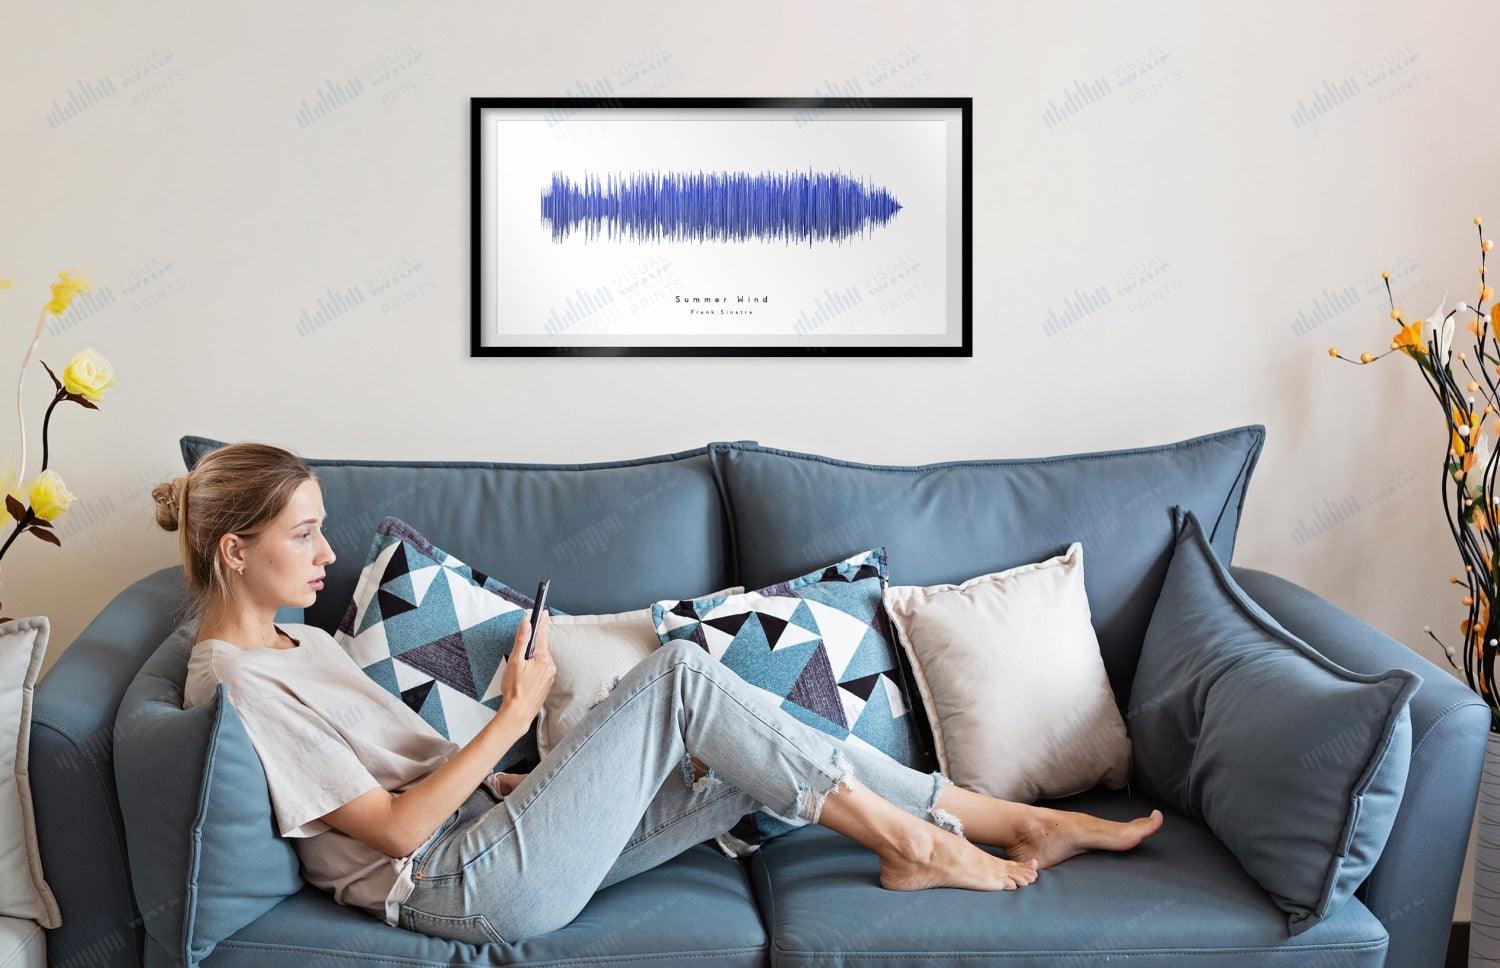 Summer Wind by Frank Sinatra - Visual Wave Prints